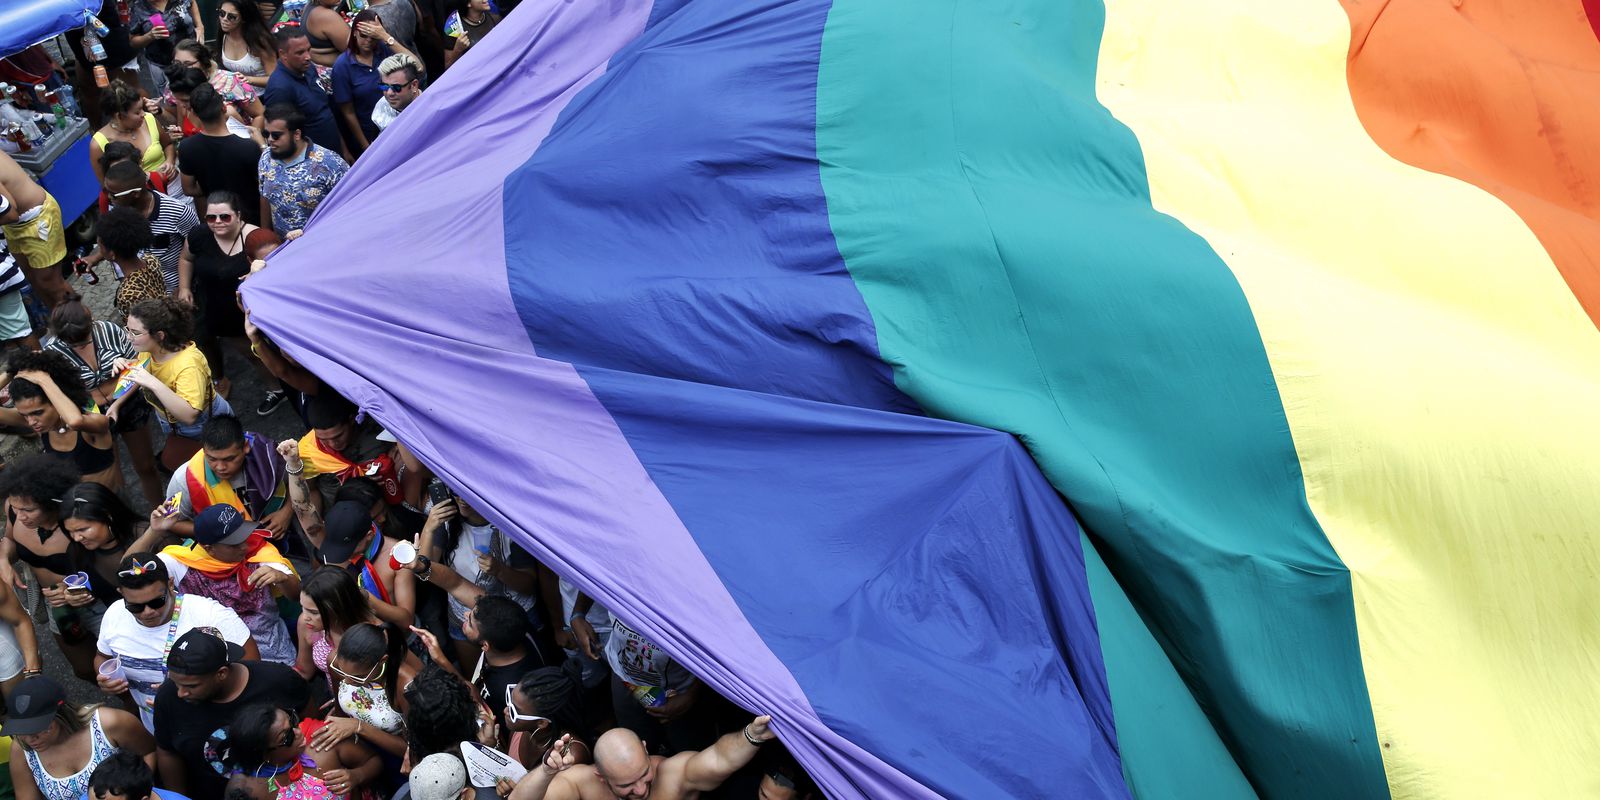 In May 2019, 1.2% of Brazilians, or 1.8 million, declared themselves homosexual.